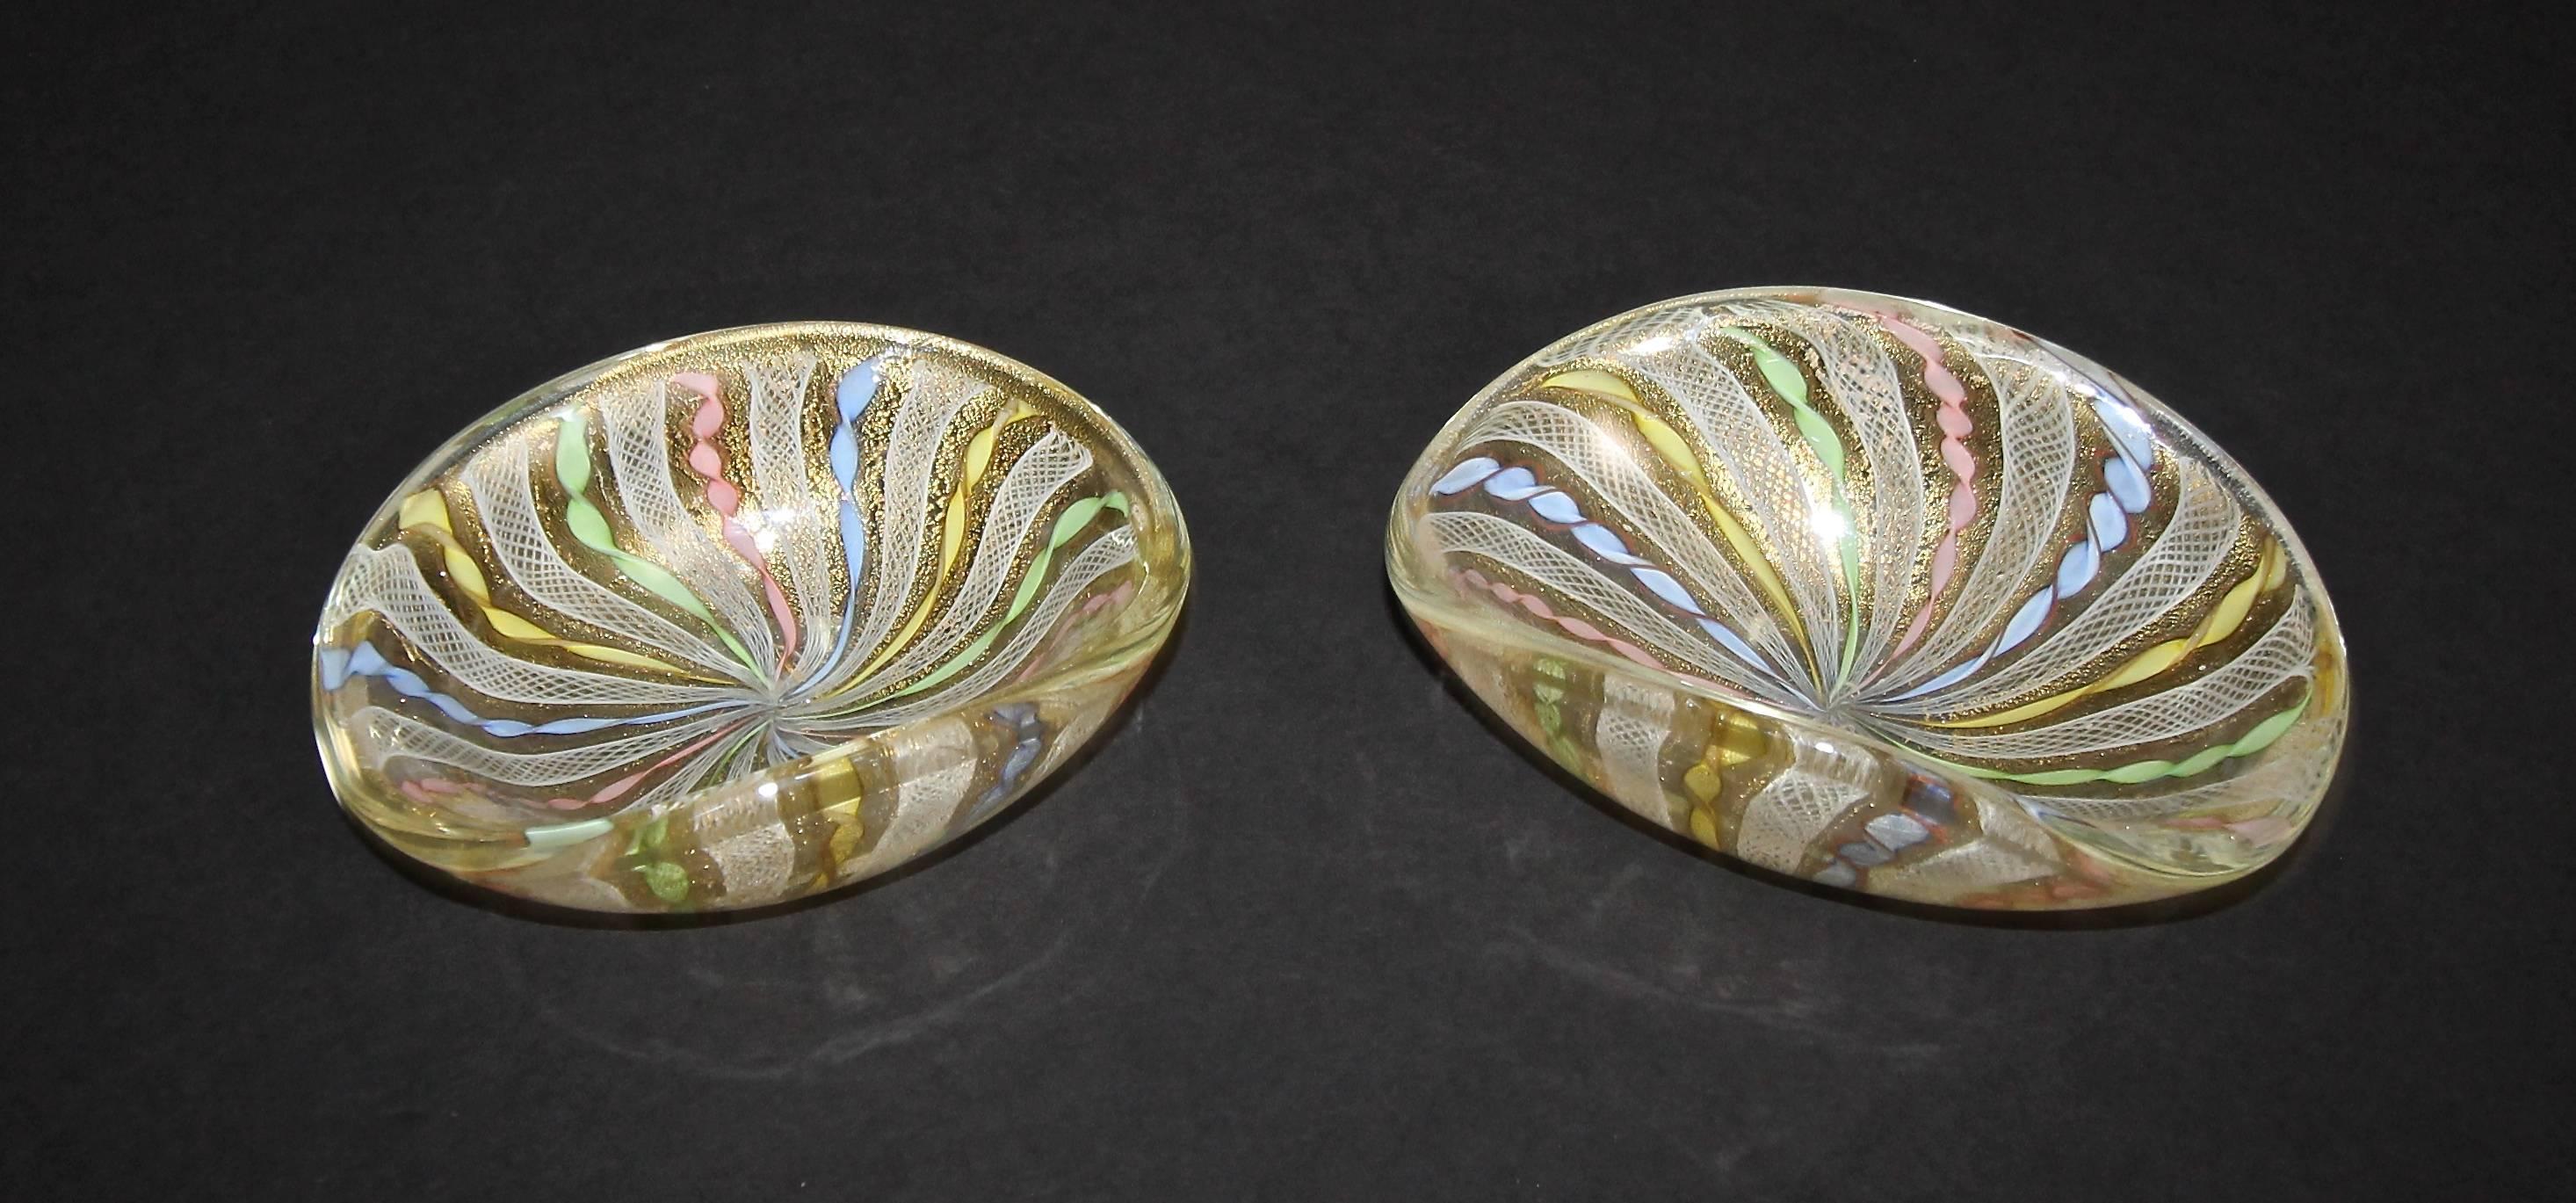 Pair of Murano Italian latticino (ribbons) handblown glass oval shape bowls. Expertly crafted with assortment of colors and gold inclusions.